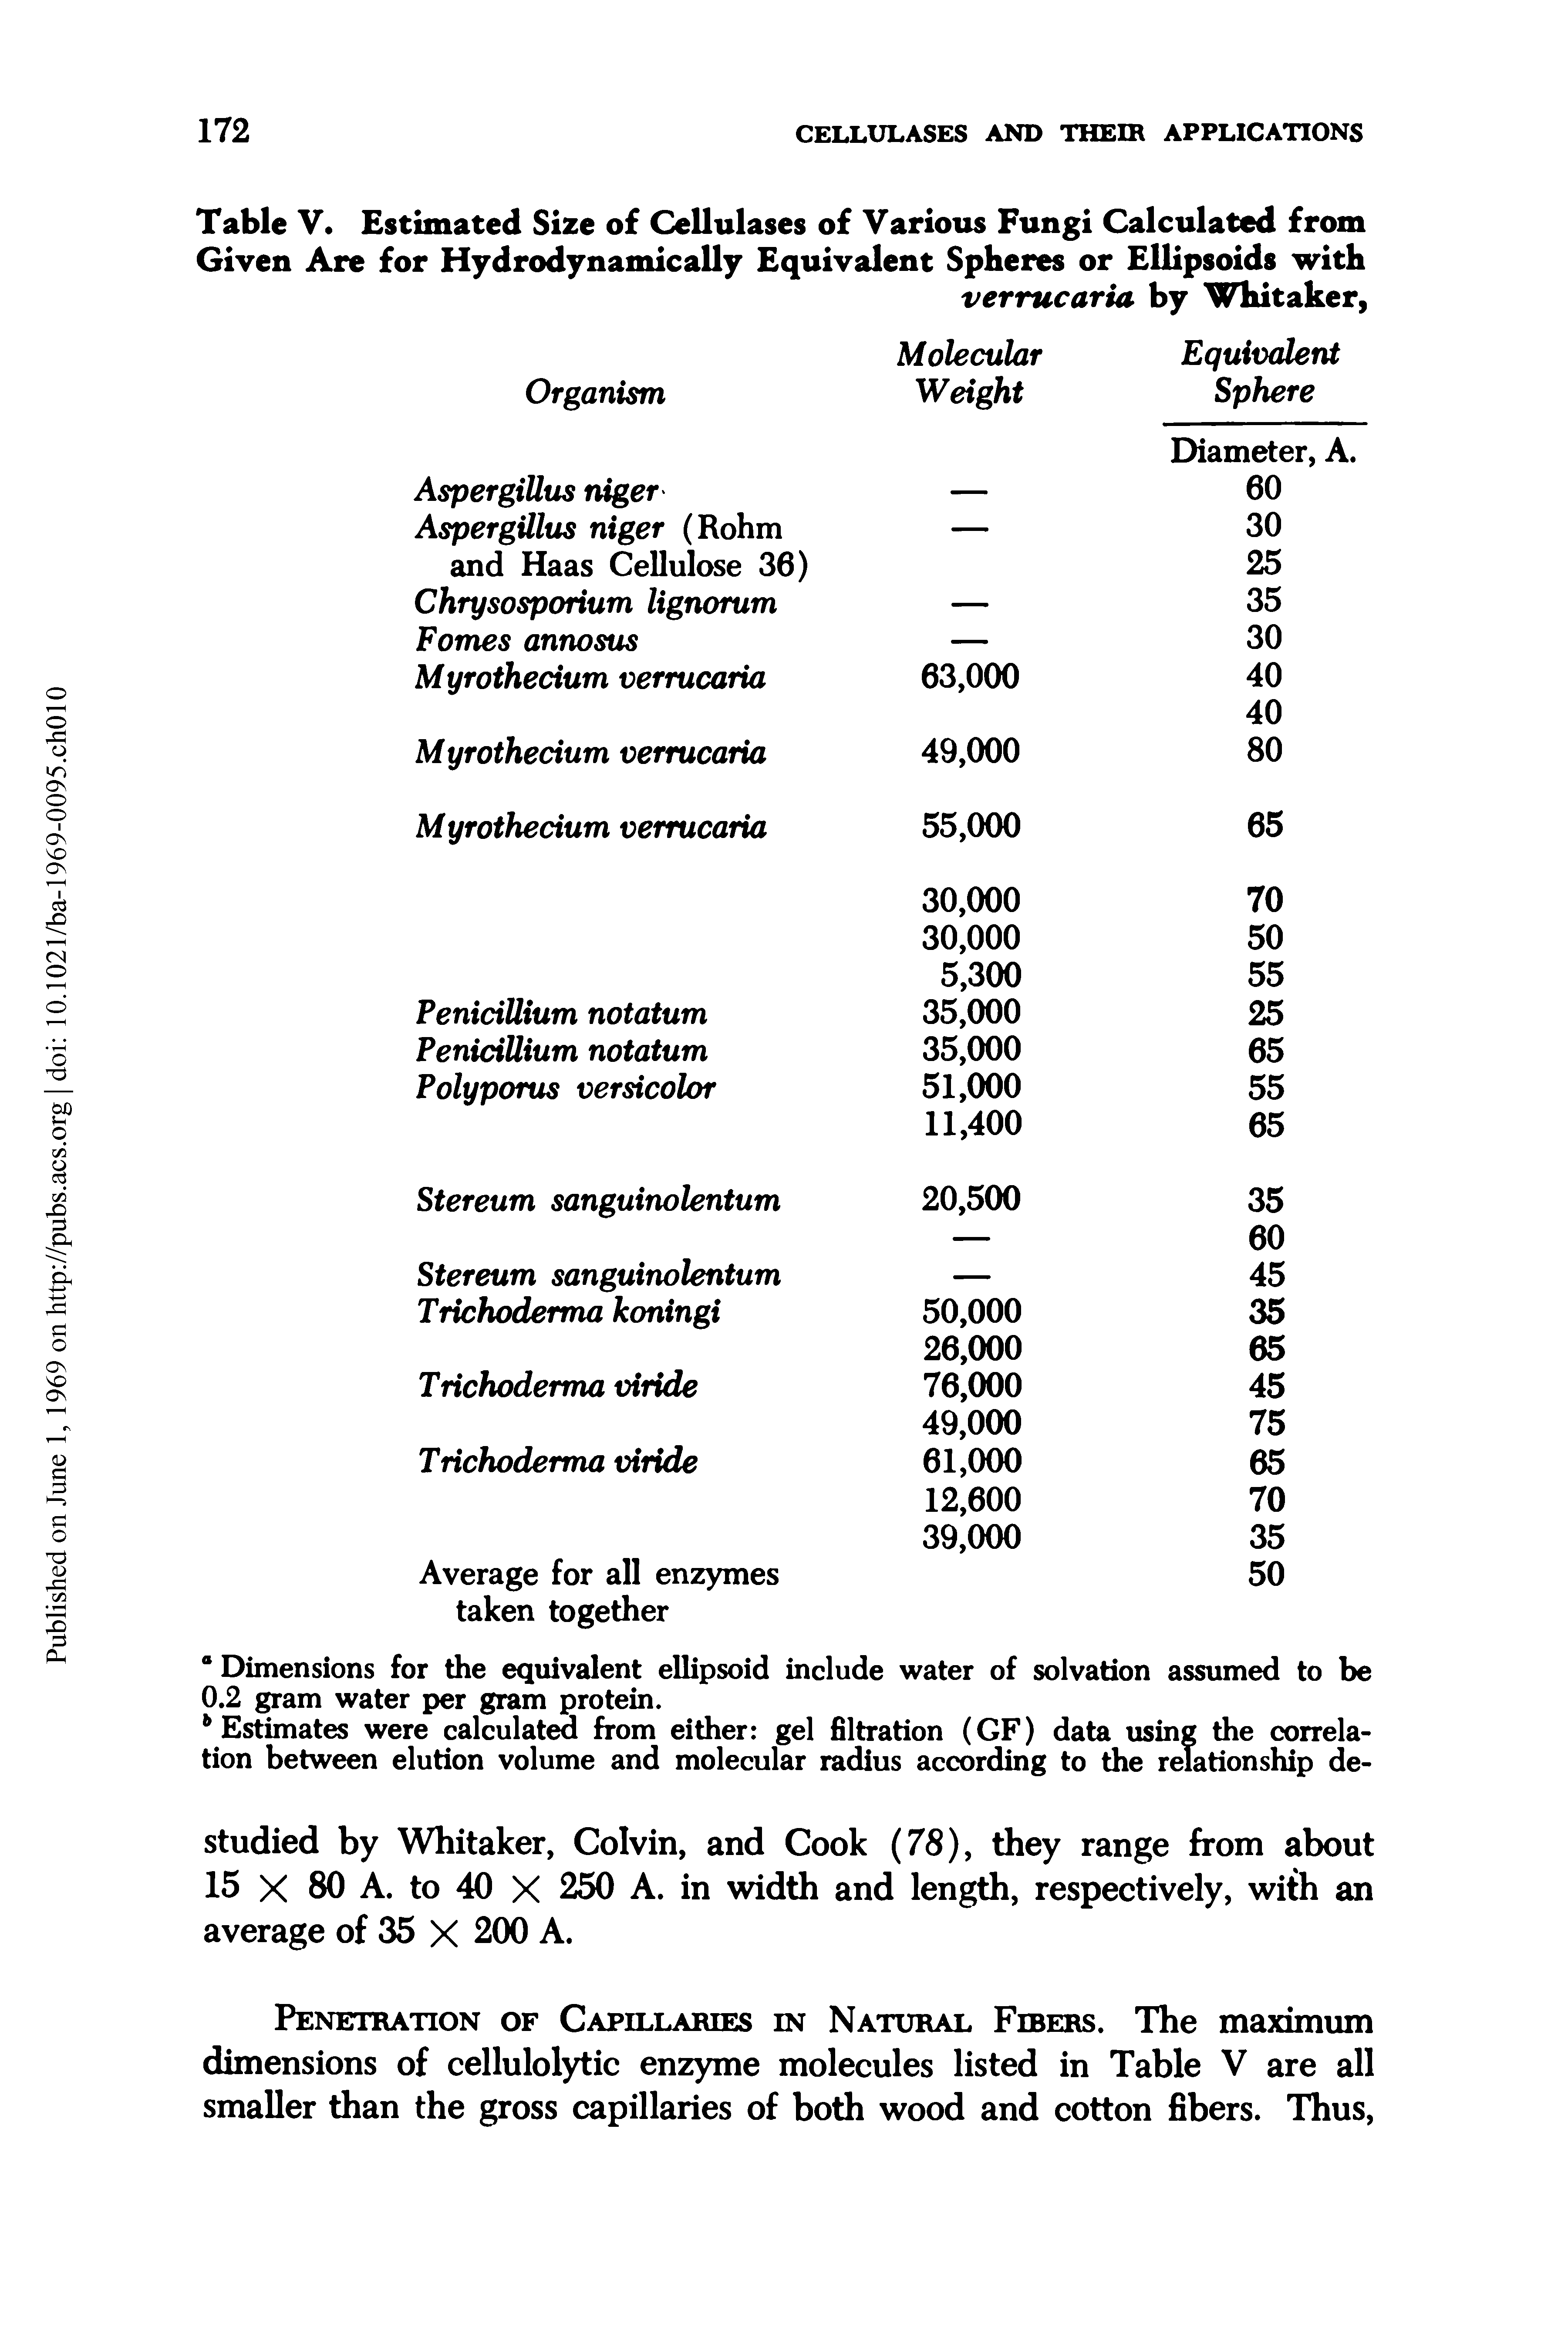 Table V. Estimated Size of Cellulases of Various Fungi Calculated from Given Are for Hydrodynamically Equivalent Spheres or Ellipsoids with...